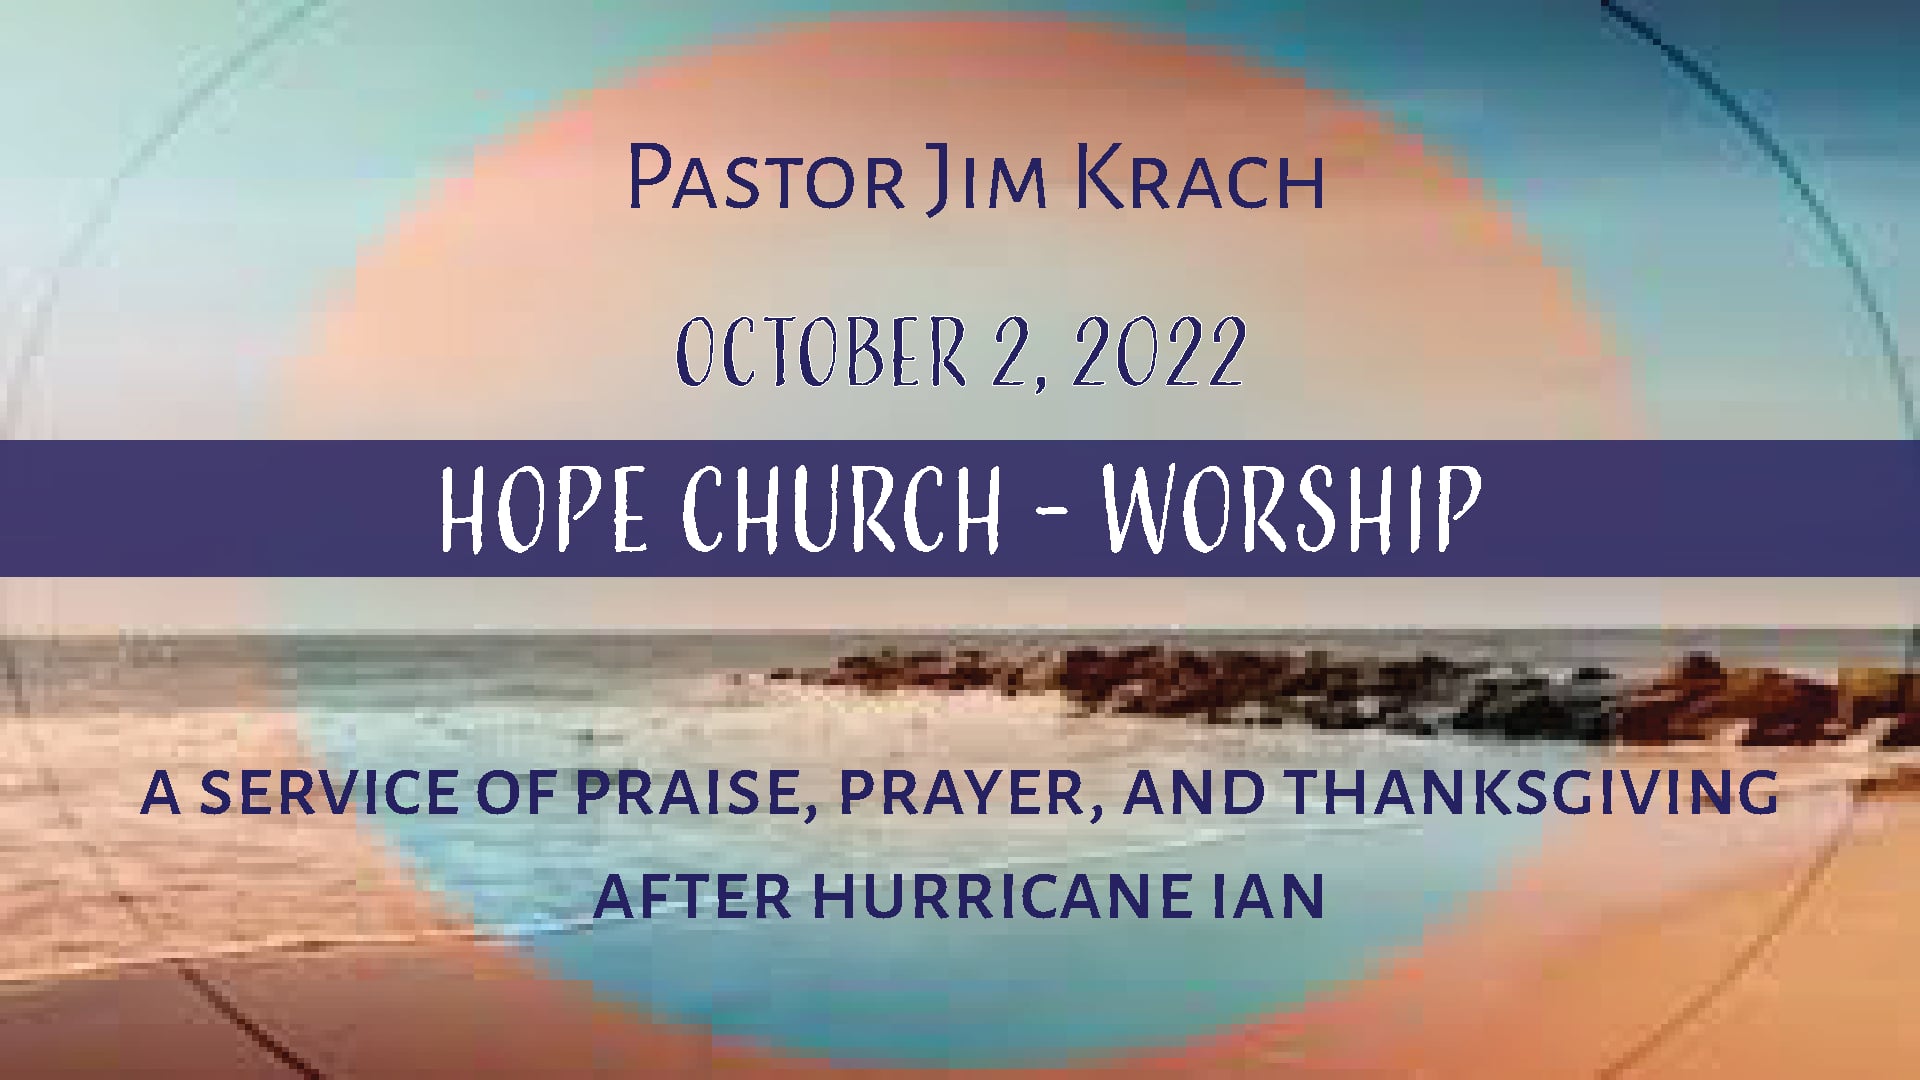 Hope Church - Worship October 2, 2022 (audio only).mp4